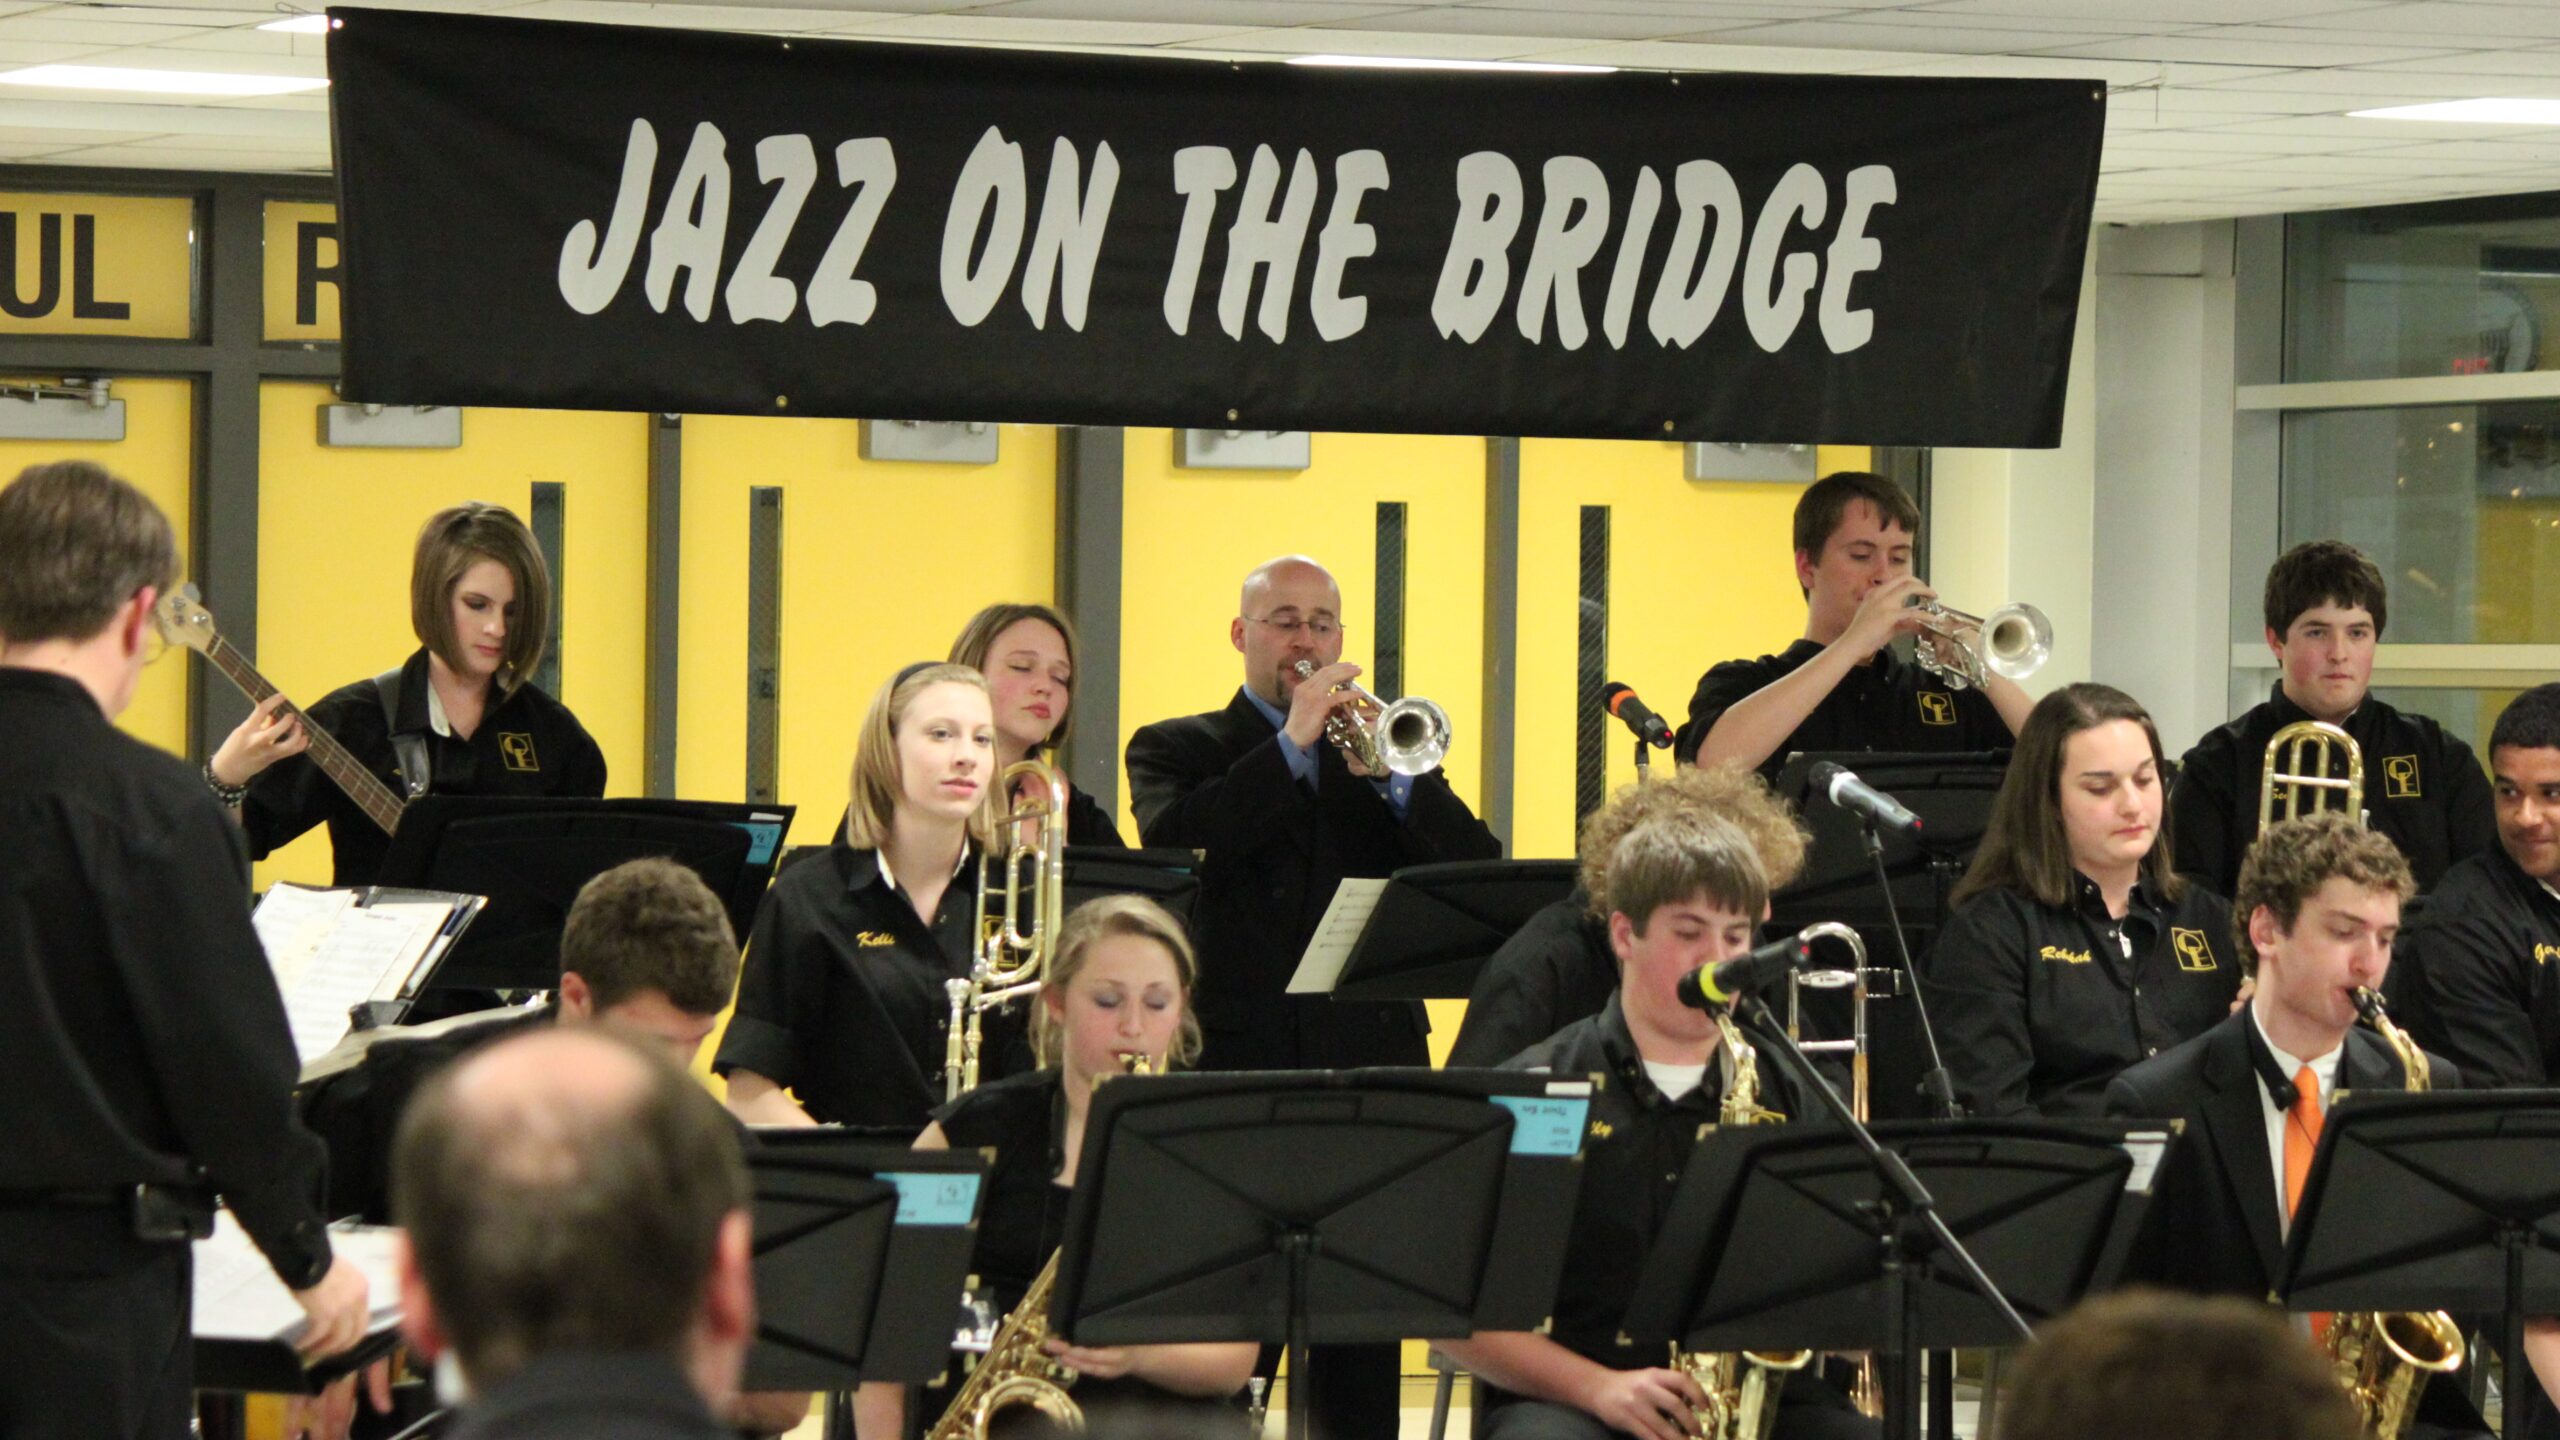 2011 Shawnee Mission West Overland Express Jazz Band playing in the Jazz on the Bridge concert.